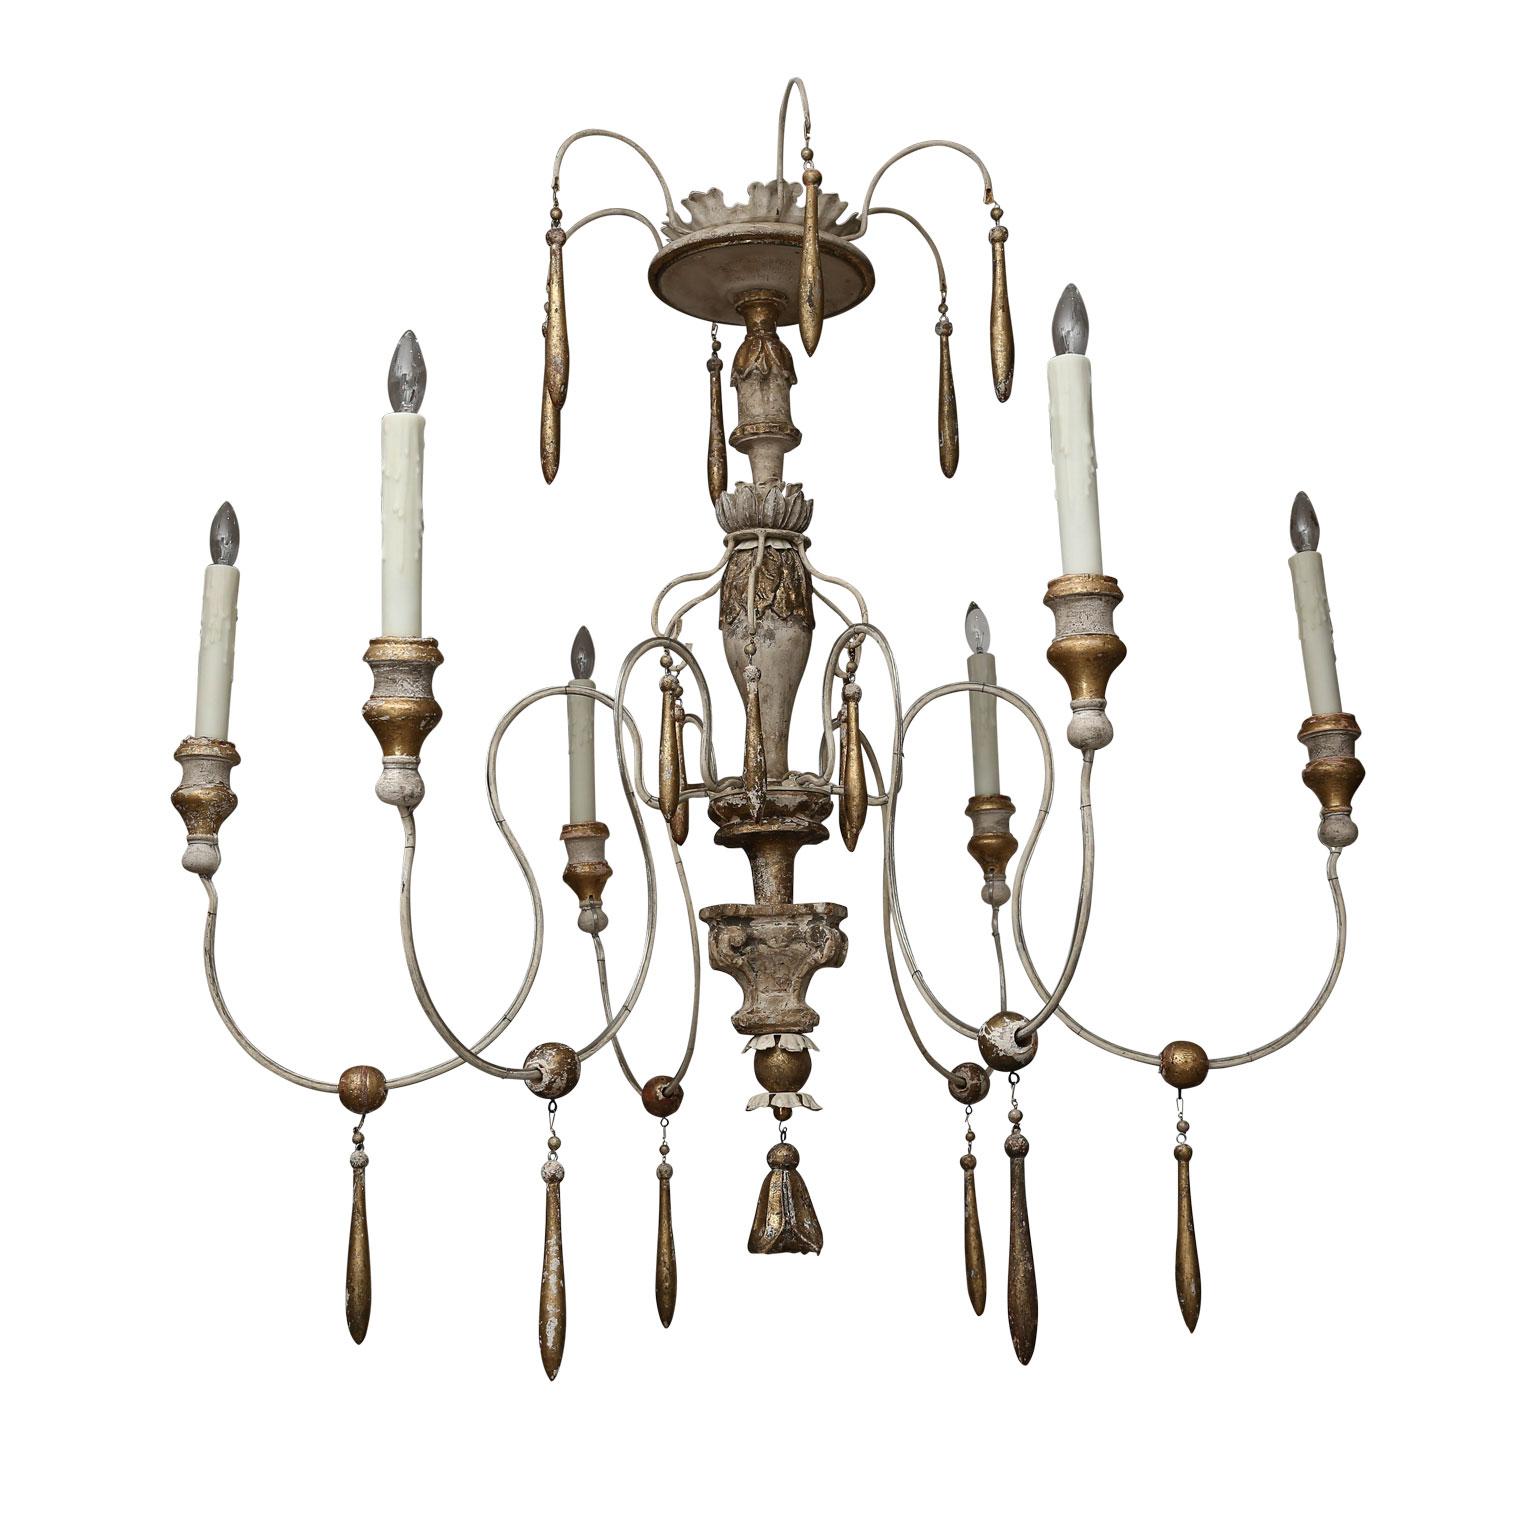 Six-arm Italian chandelier, newly constructed from 18th century and later elements. Newly wired, using all UL listed parts, for use within the USA. Lights use candelabra-size bulbs. Includes chain and a canopy (listed height does not include chain).